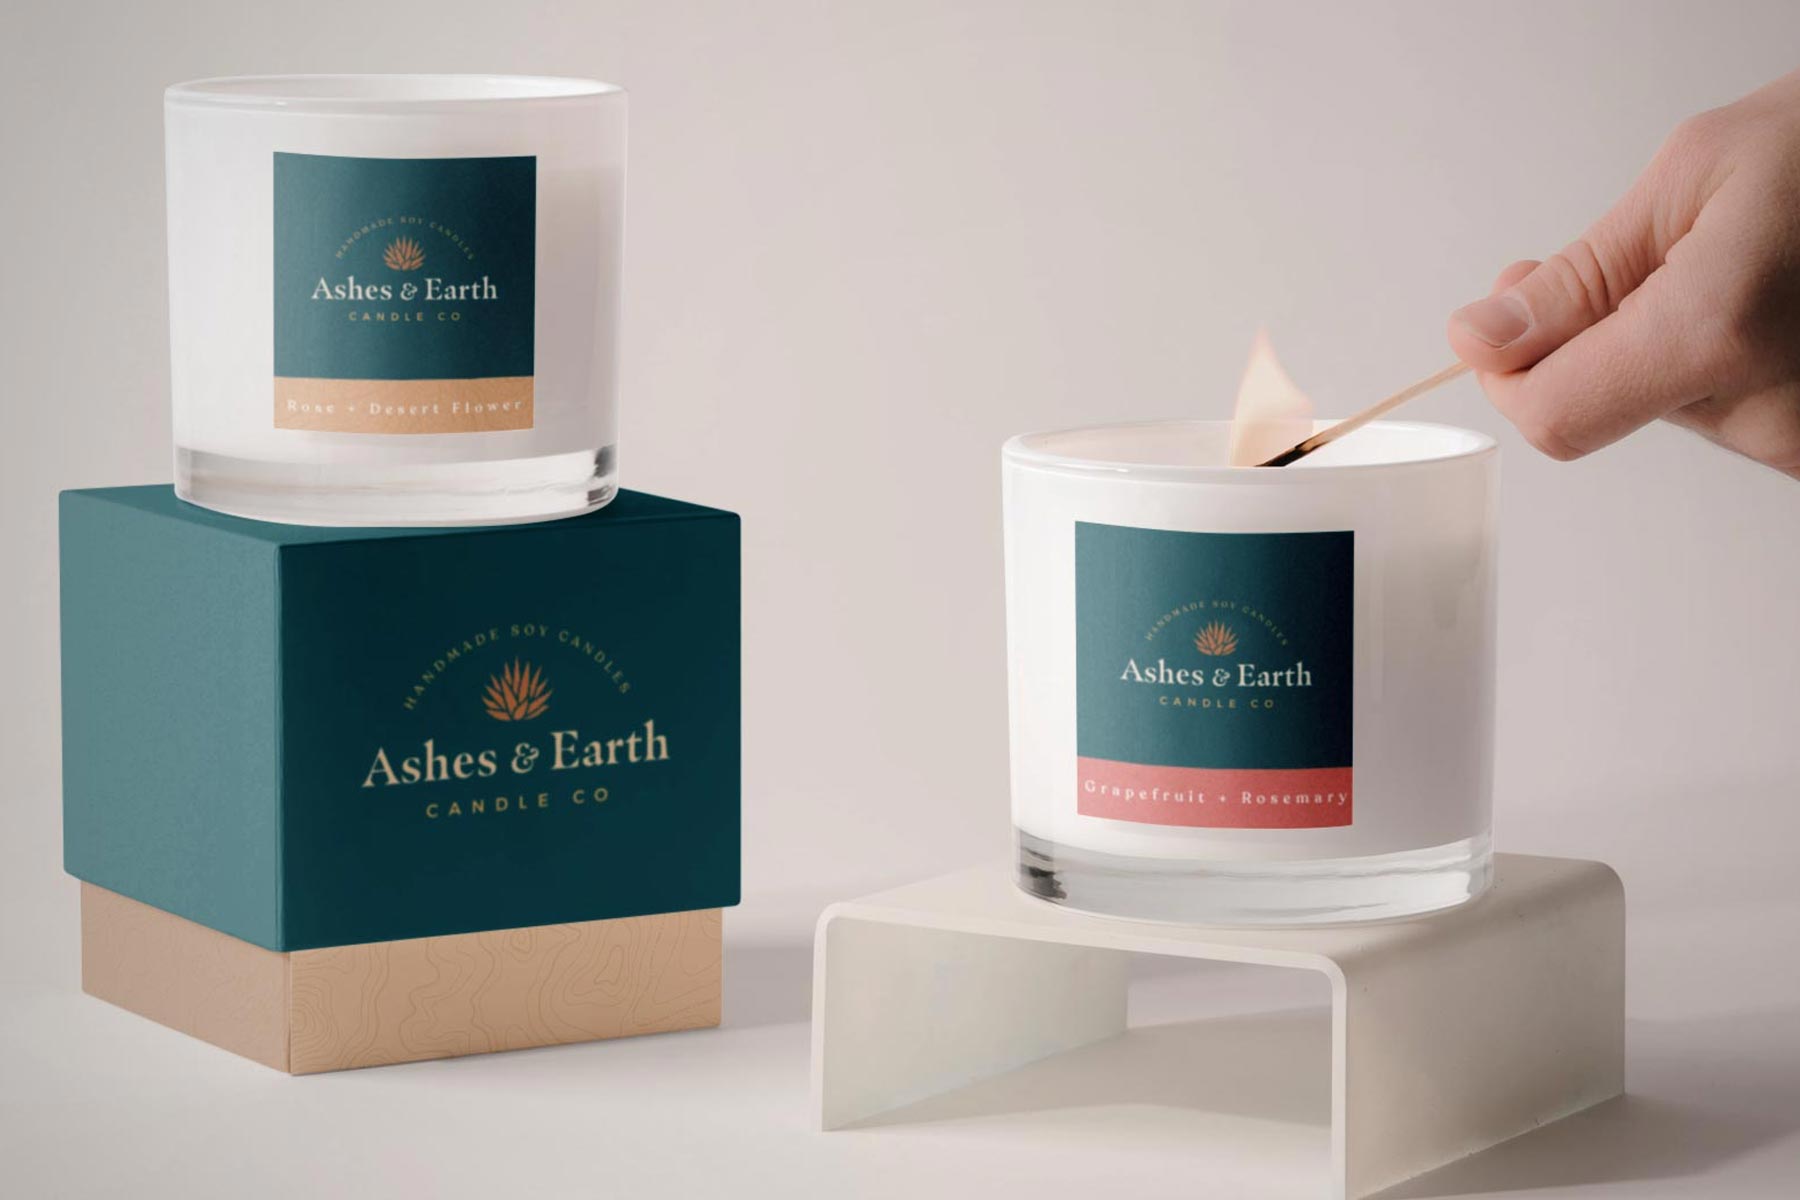 Ashes & Earth Candle Co